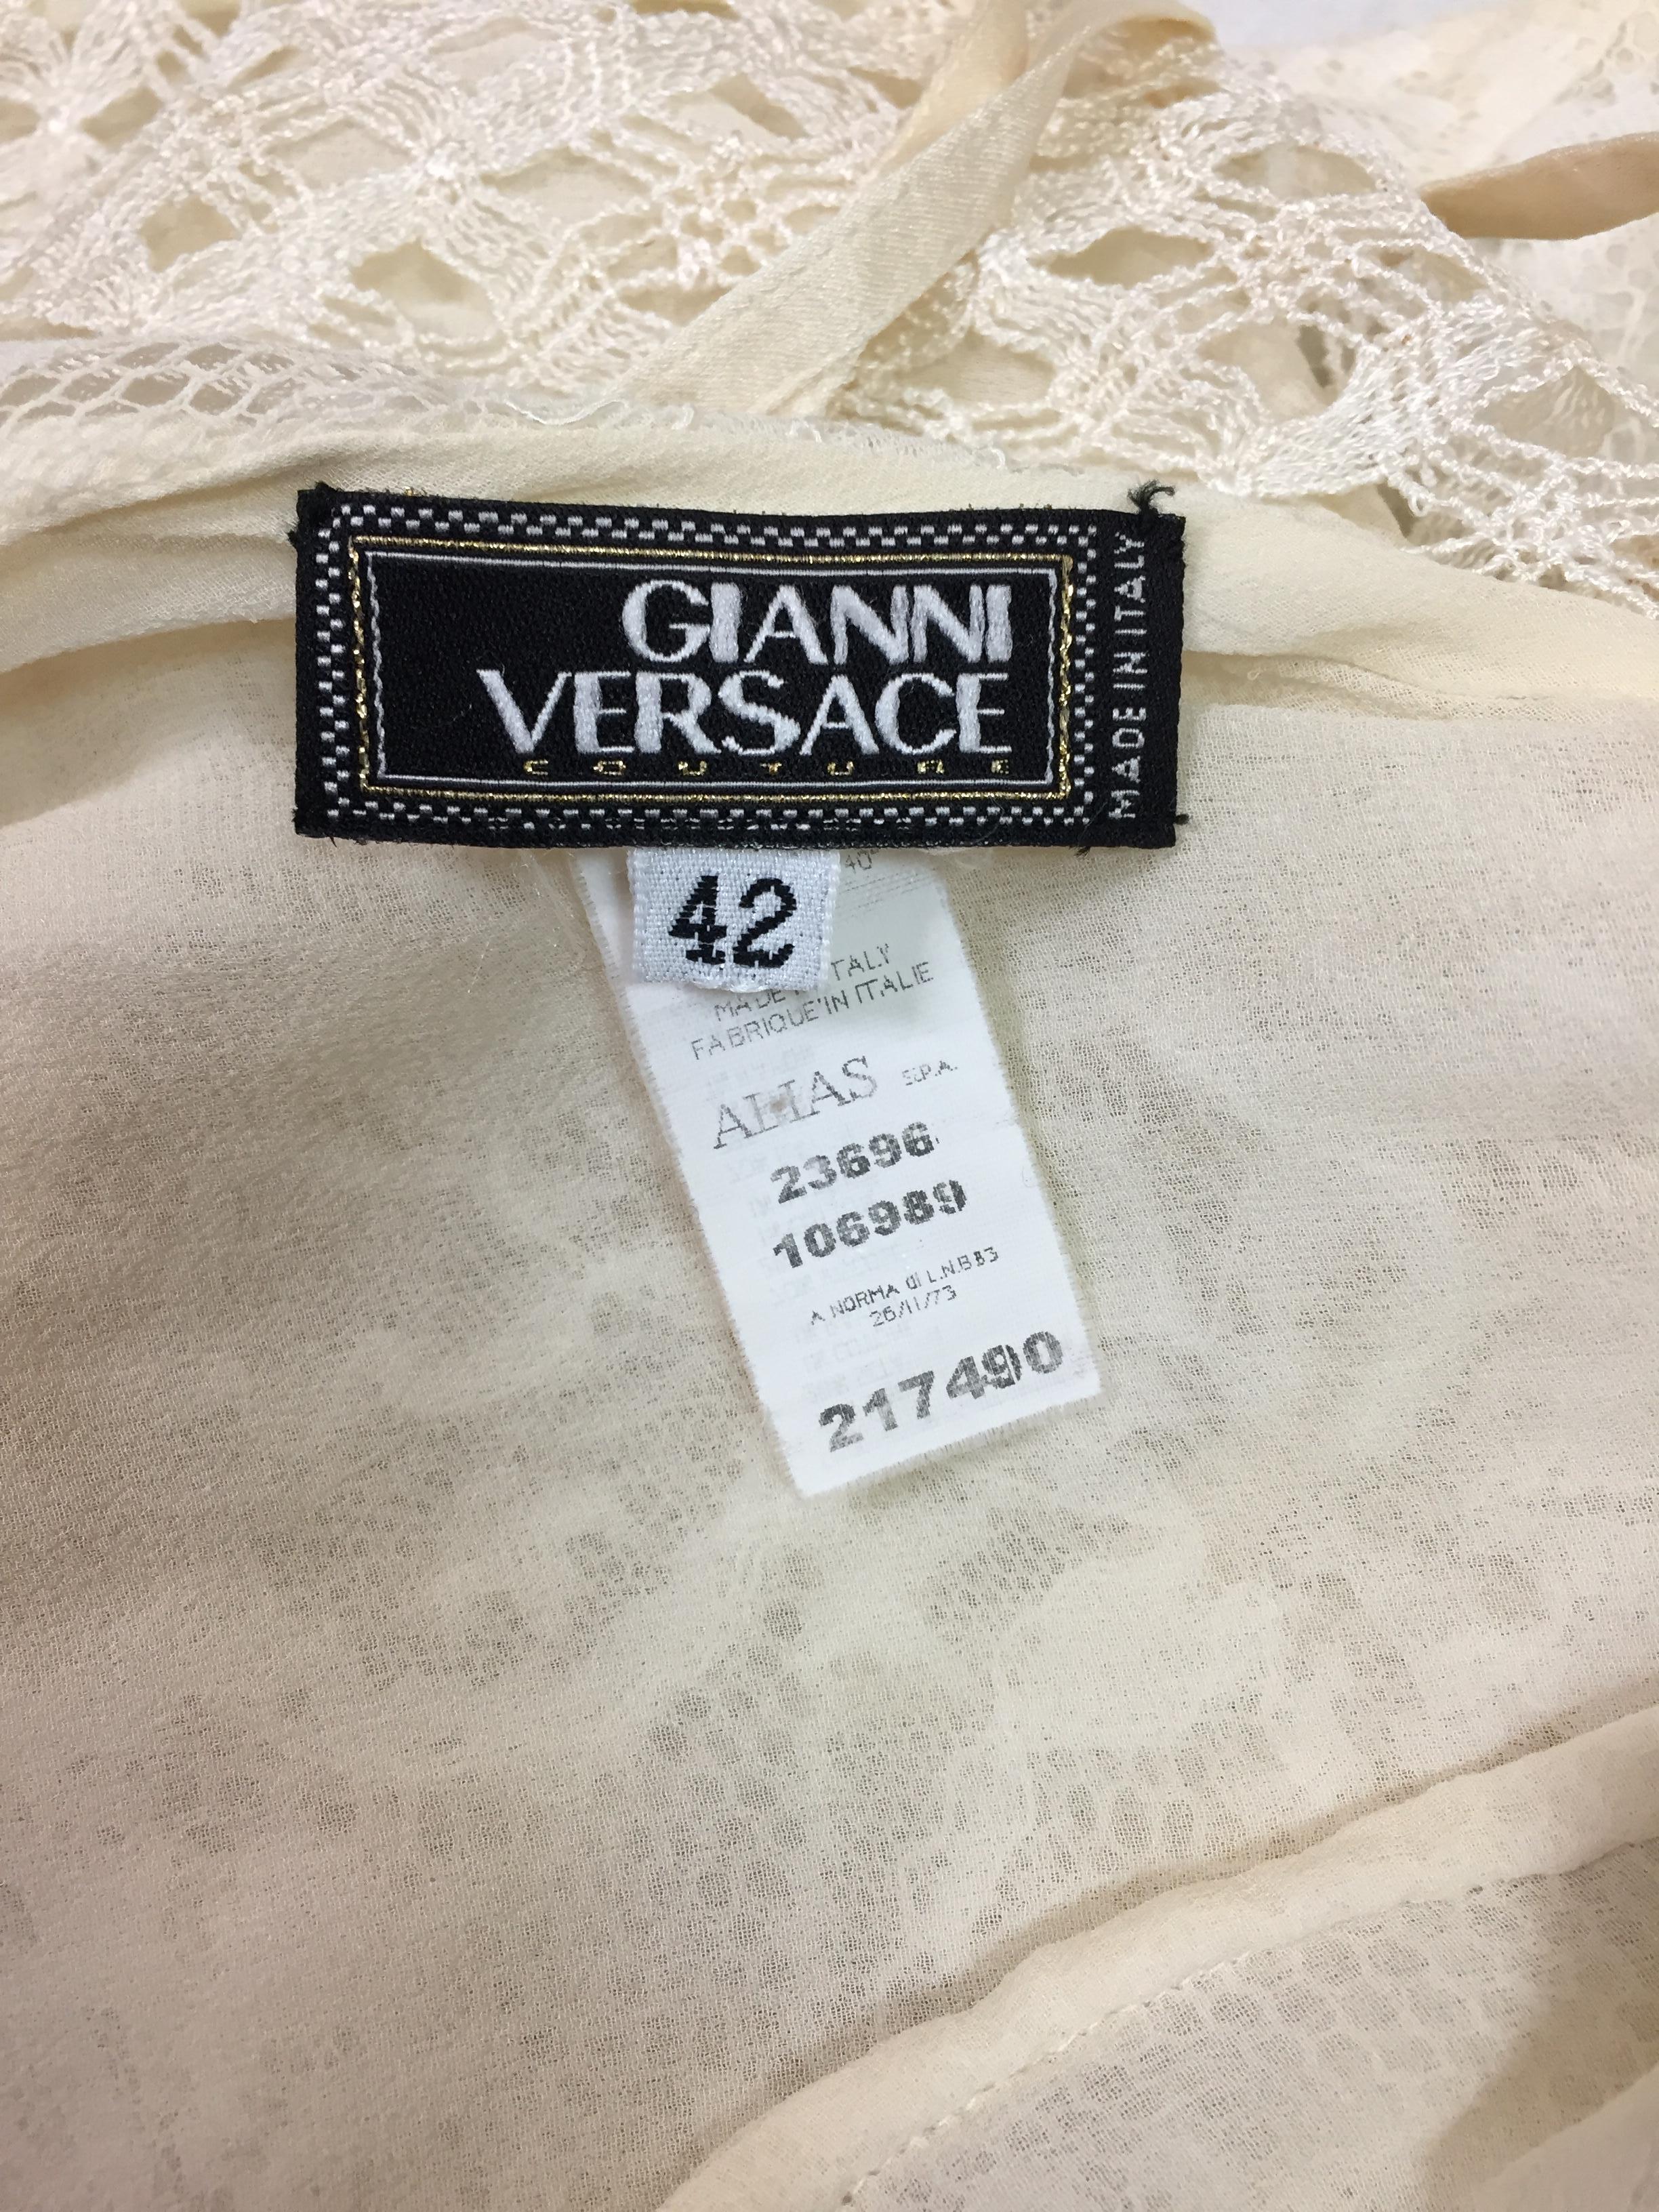 S/S 2002 Gianni Versace Sheer Ivory Plunging Corset Lace Gown Dress In Good Condition In Yukon, OK